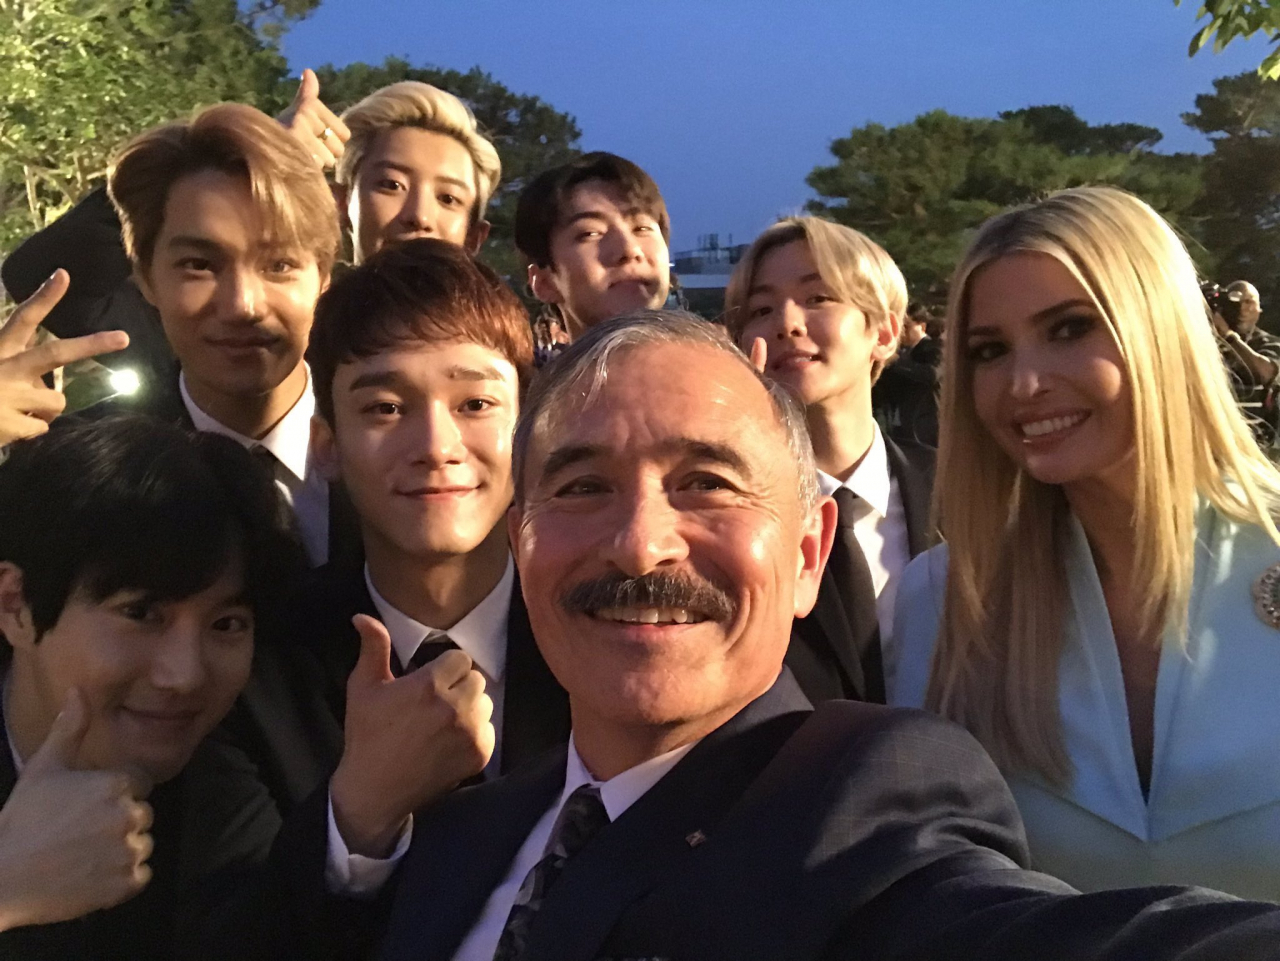 K-pop group Exo poses with Harry Harris, former US ambassador to South Korea, and Ivanka Trump, former White House adviser, during a cocktail reception at the Blue House in 2019. (Screenshot captured from Twitter)